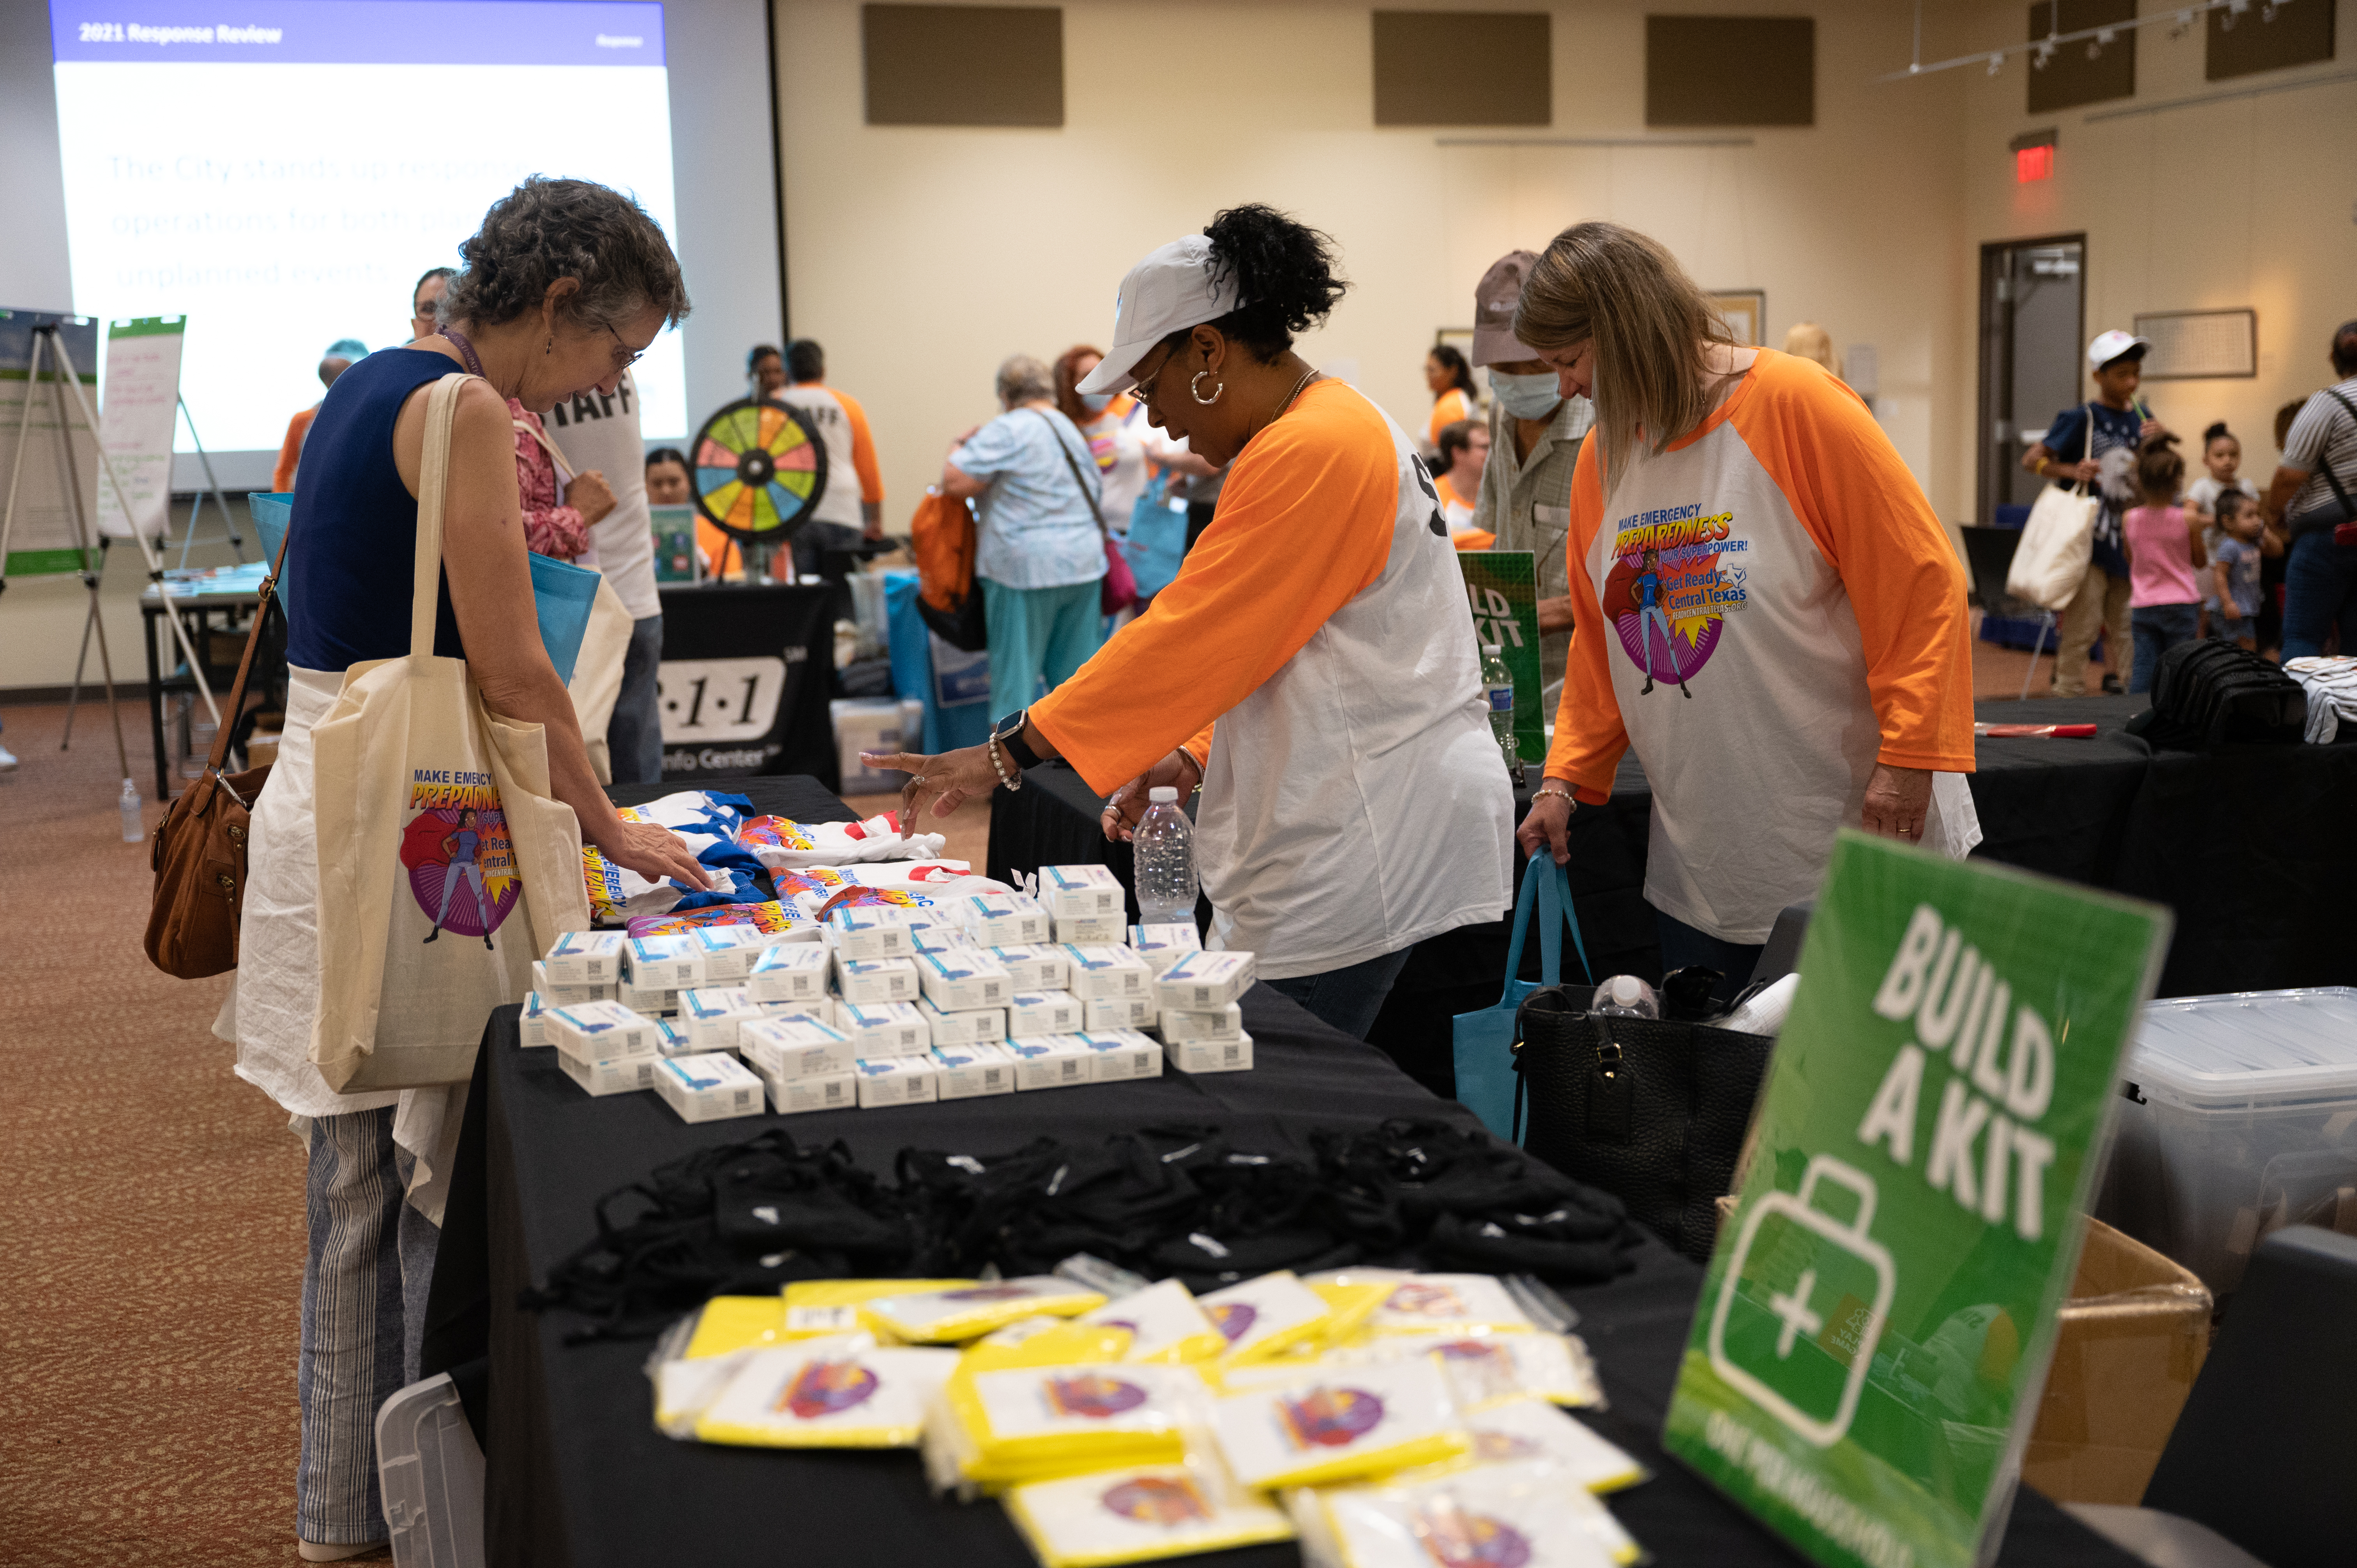 Image of 3 women at a table with various emergency kit materials. Sign in foreground reads, "Build a kit!"